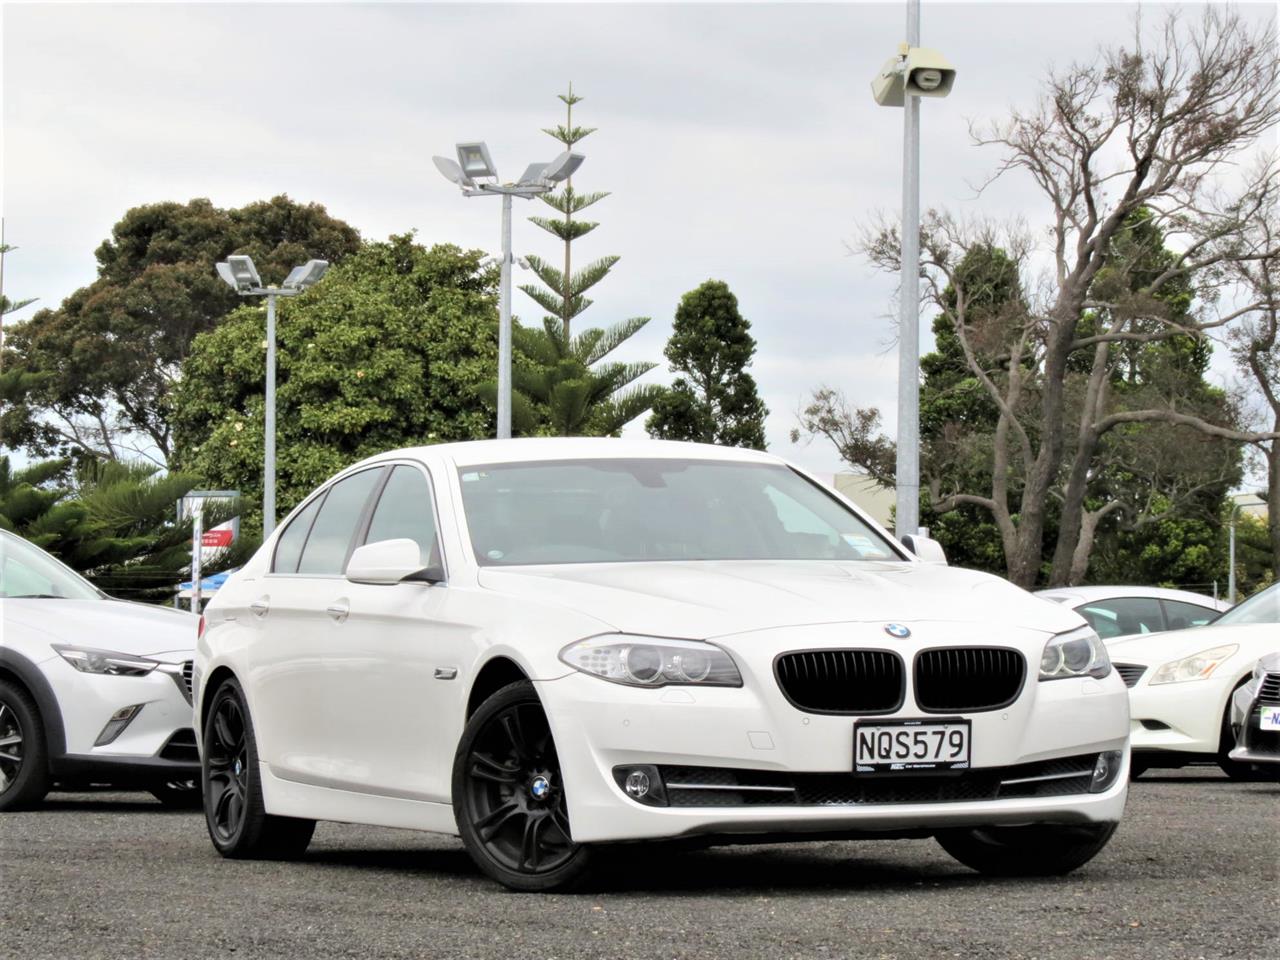 NZC 2012 BMW 520d just arrived to Auckland